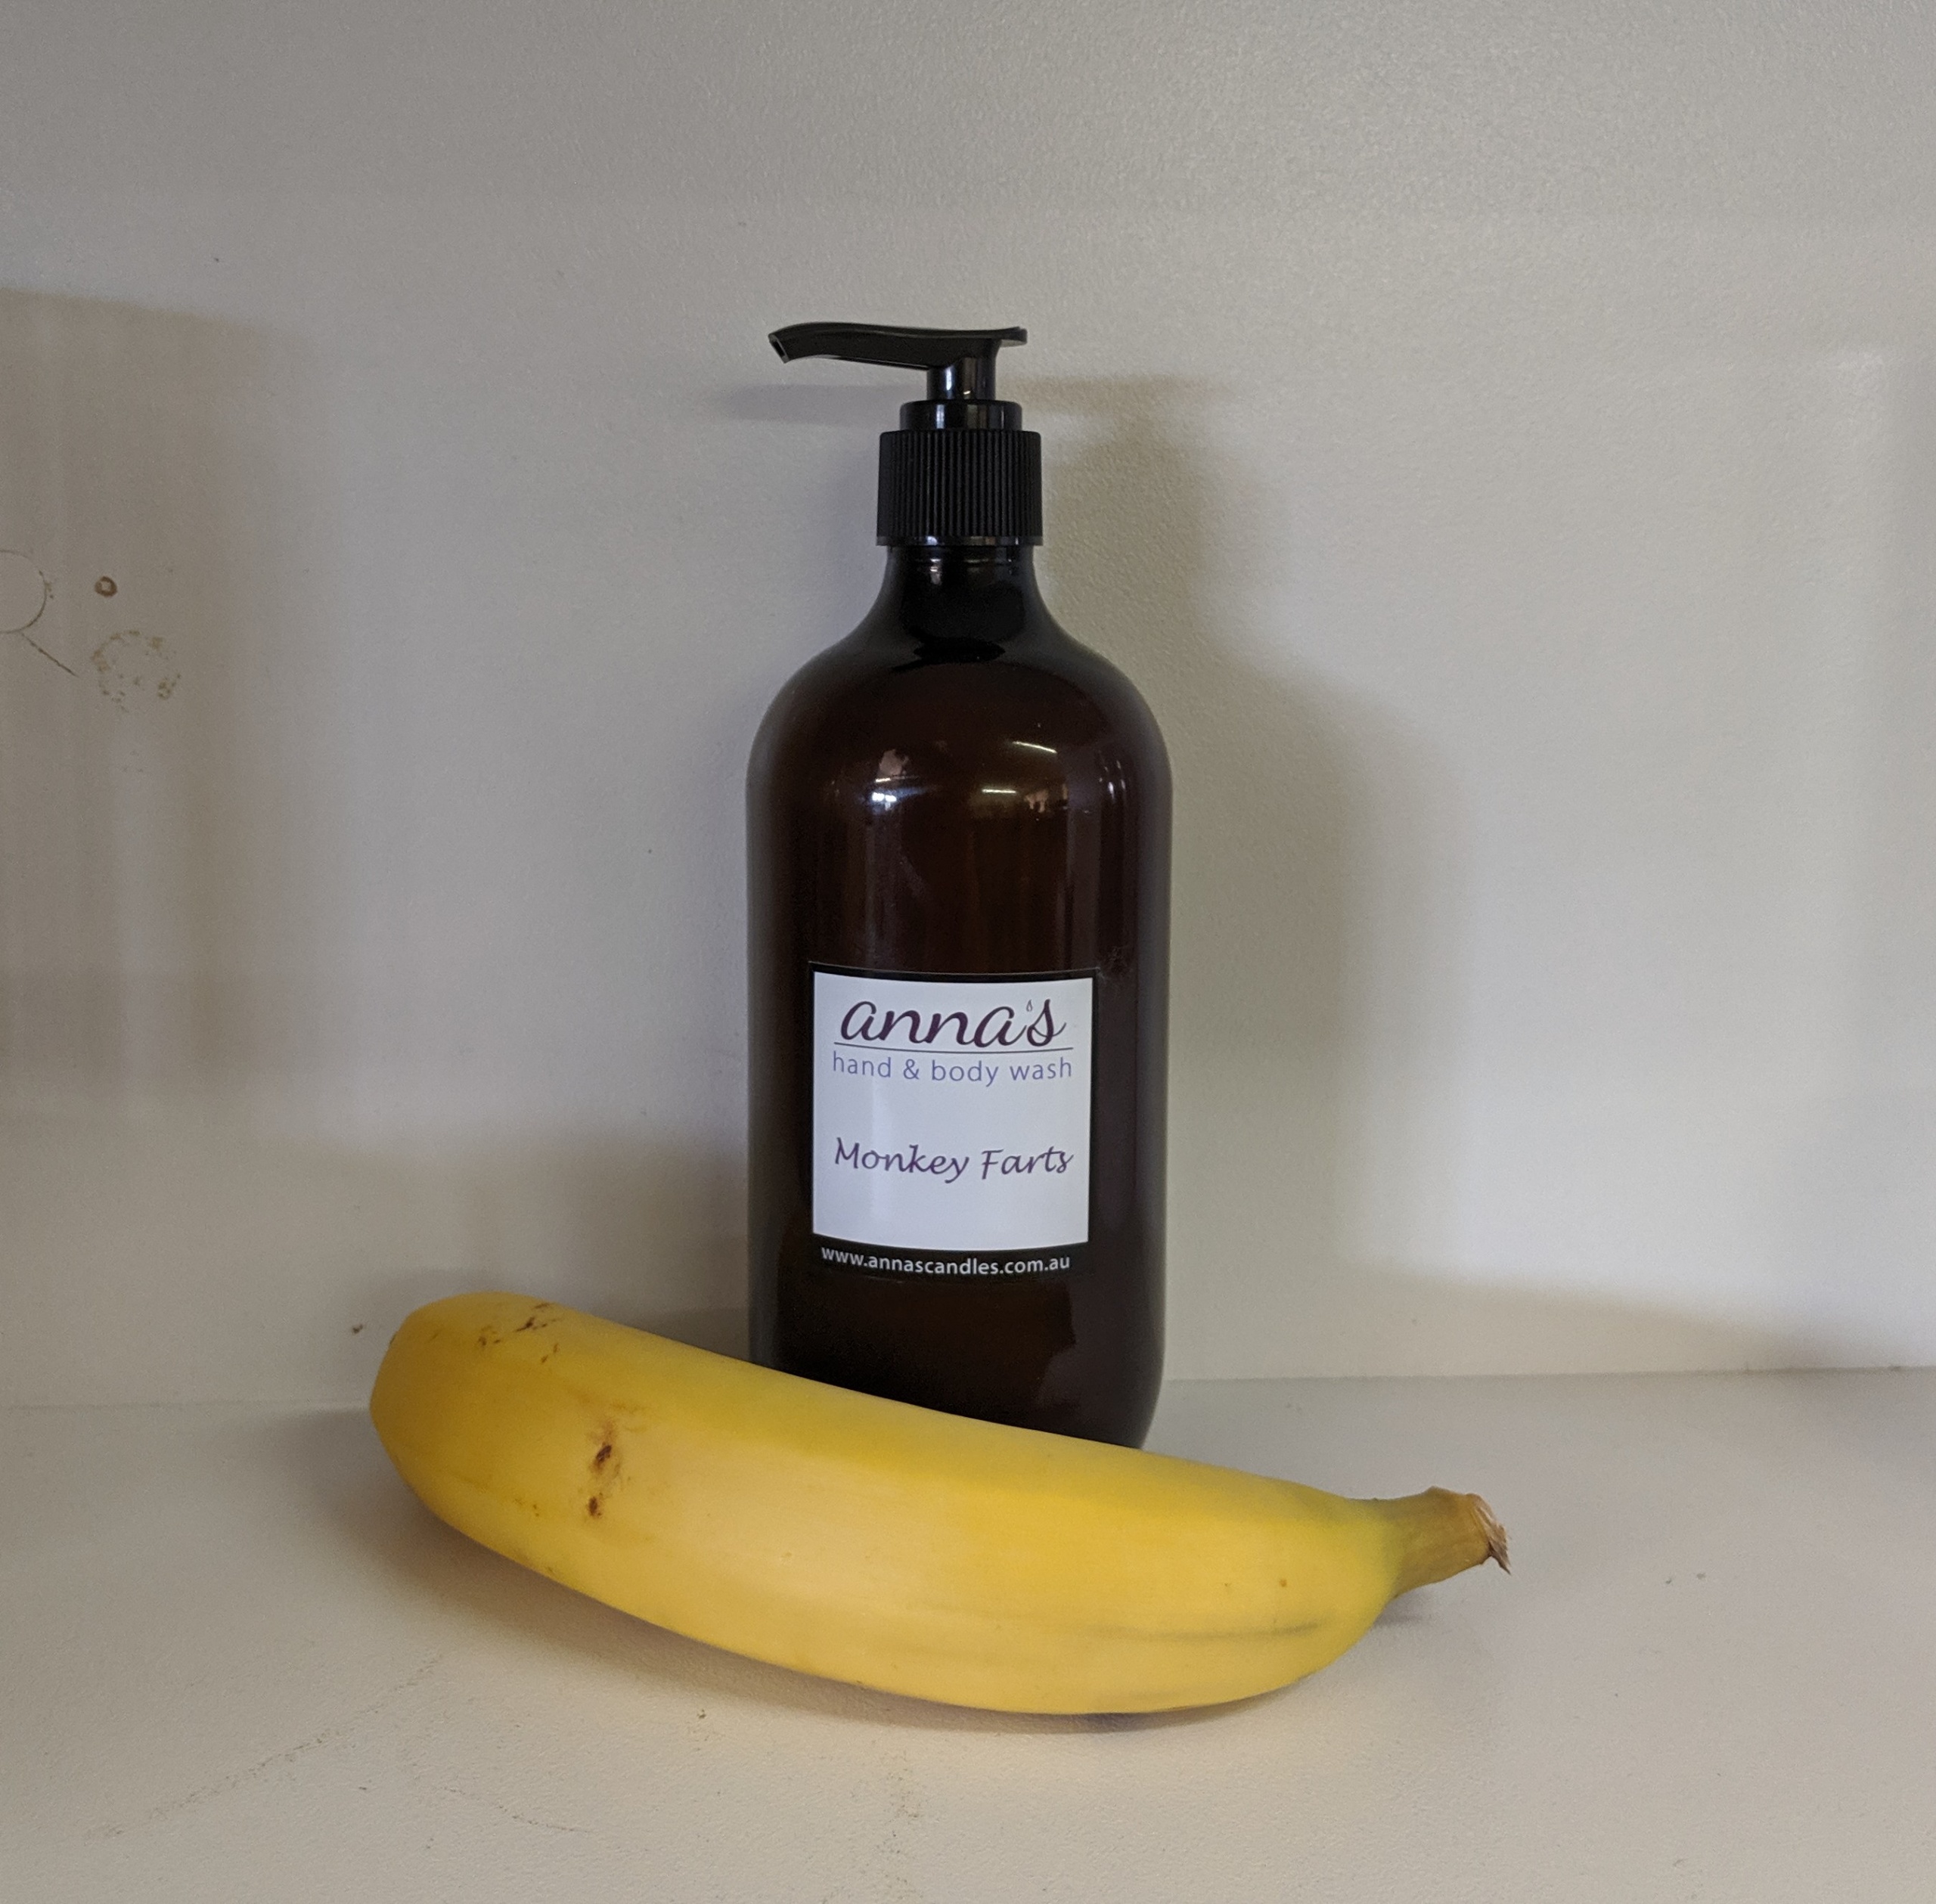 Monkey Farts Hand and Body Wash